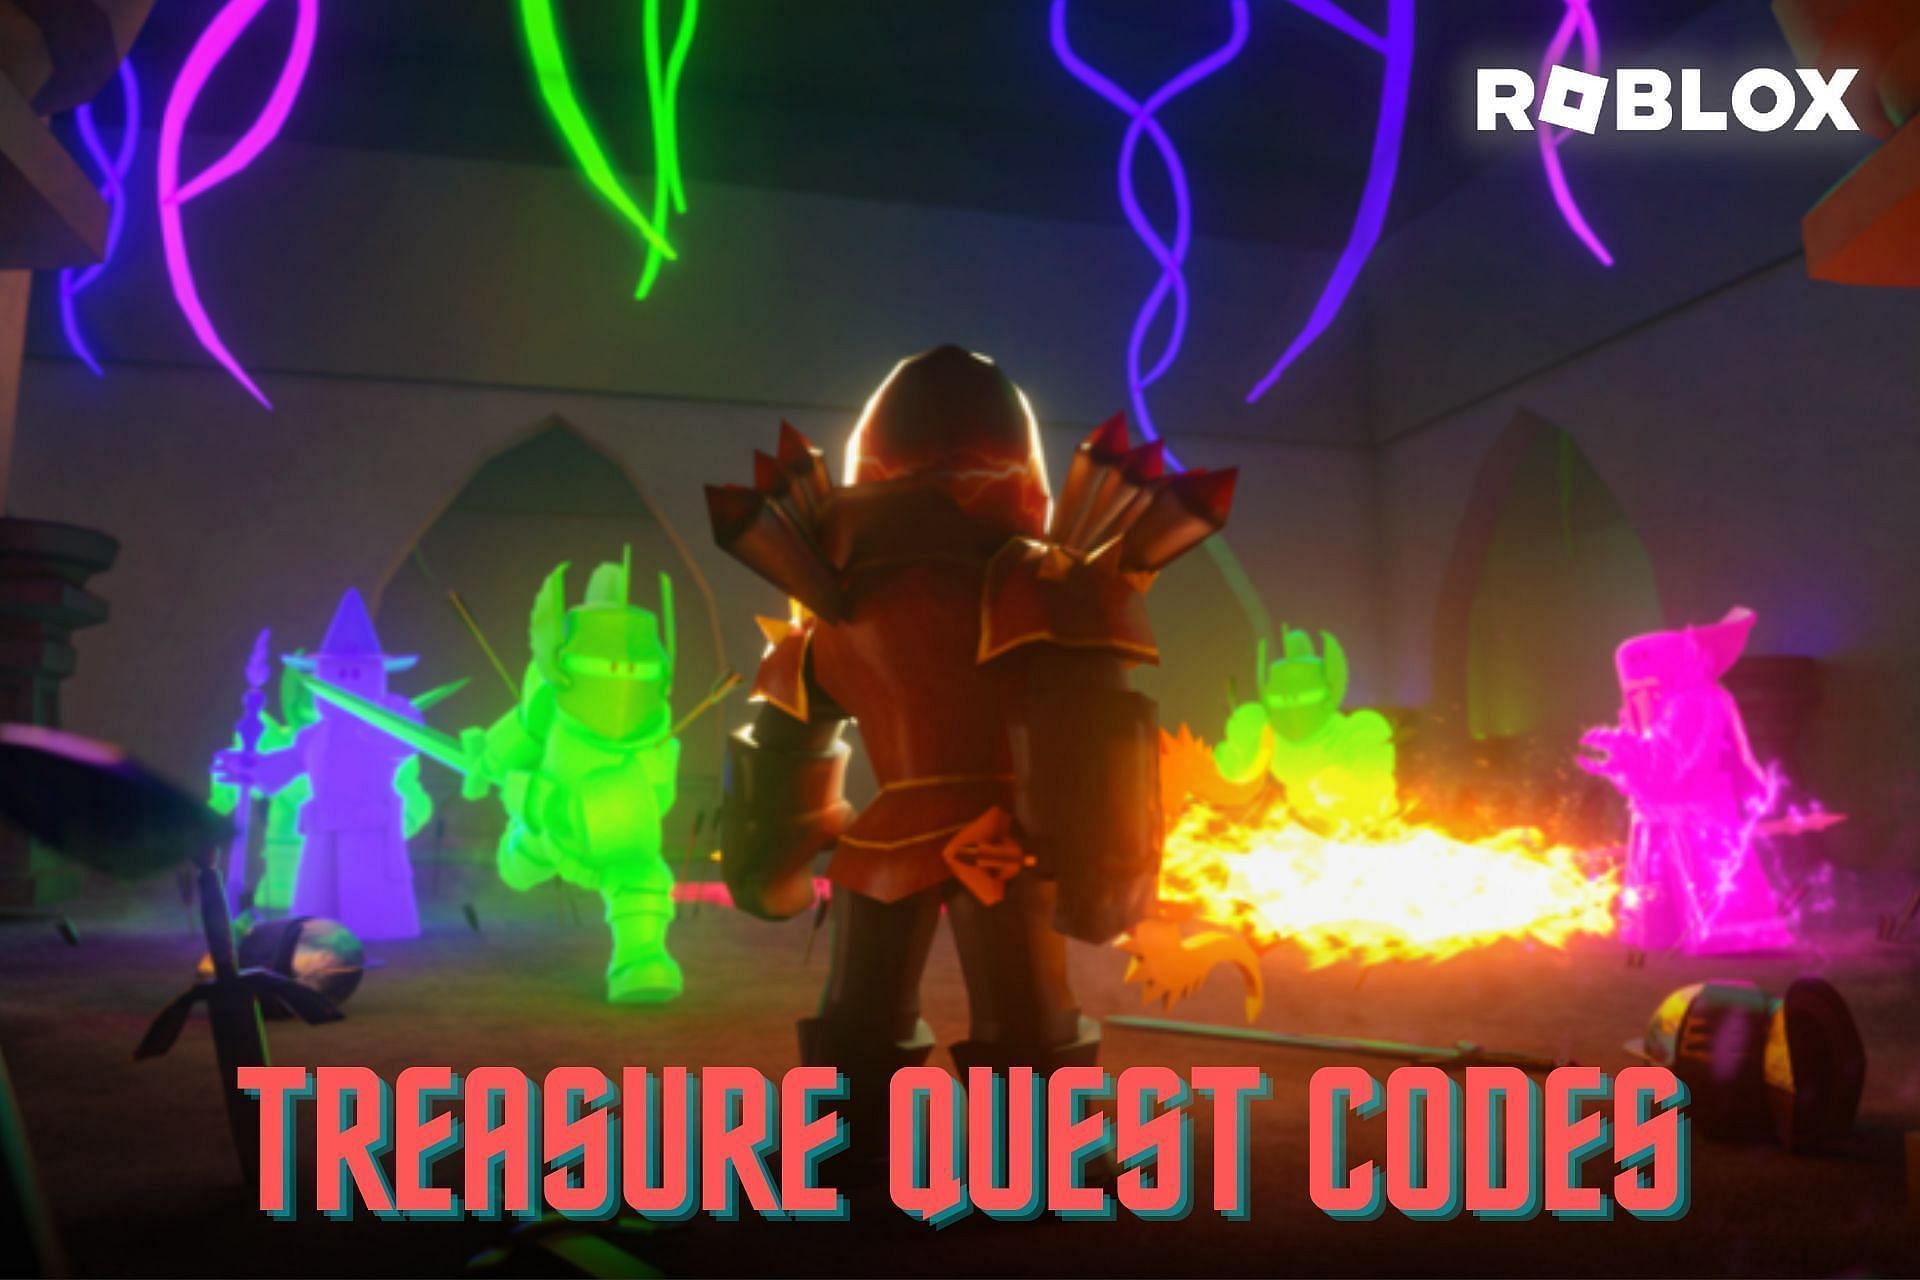 Roblox Treasure Quest codes (December 2022) Free Potions, weapons, and